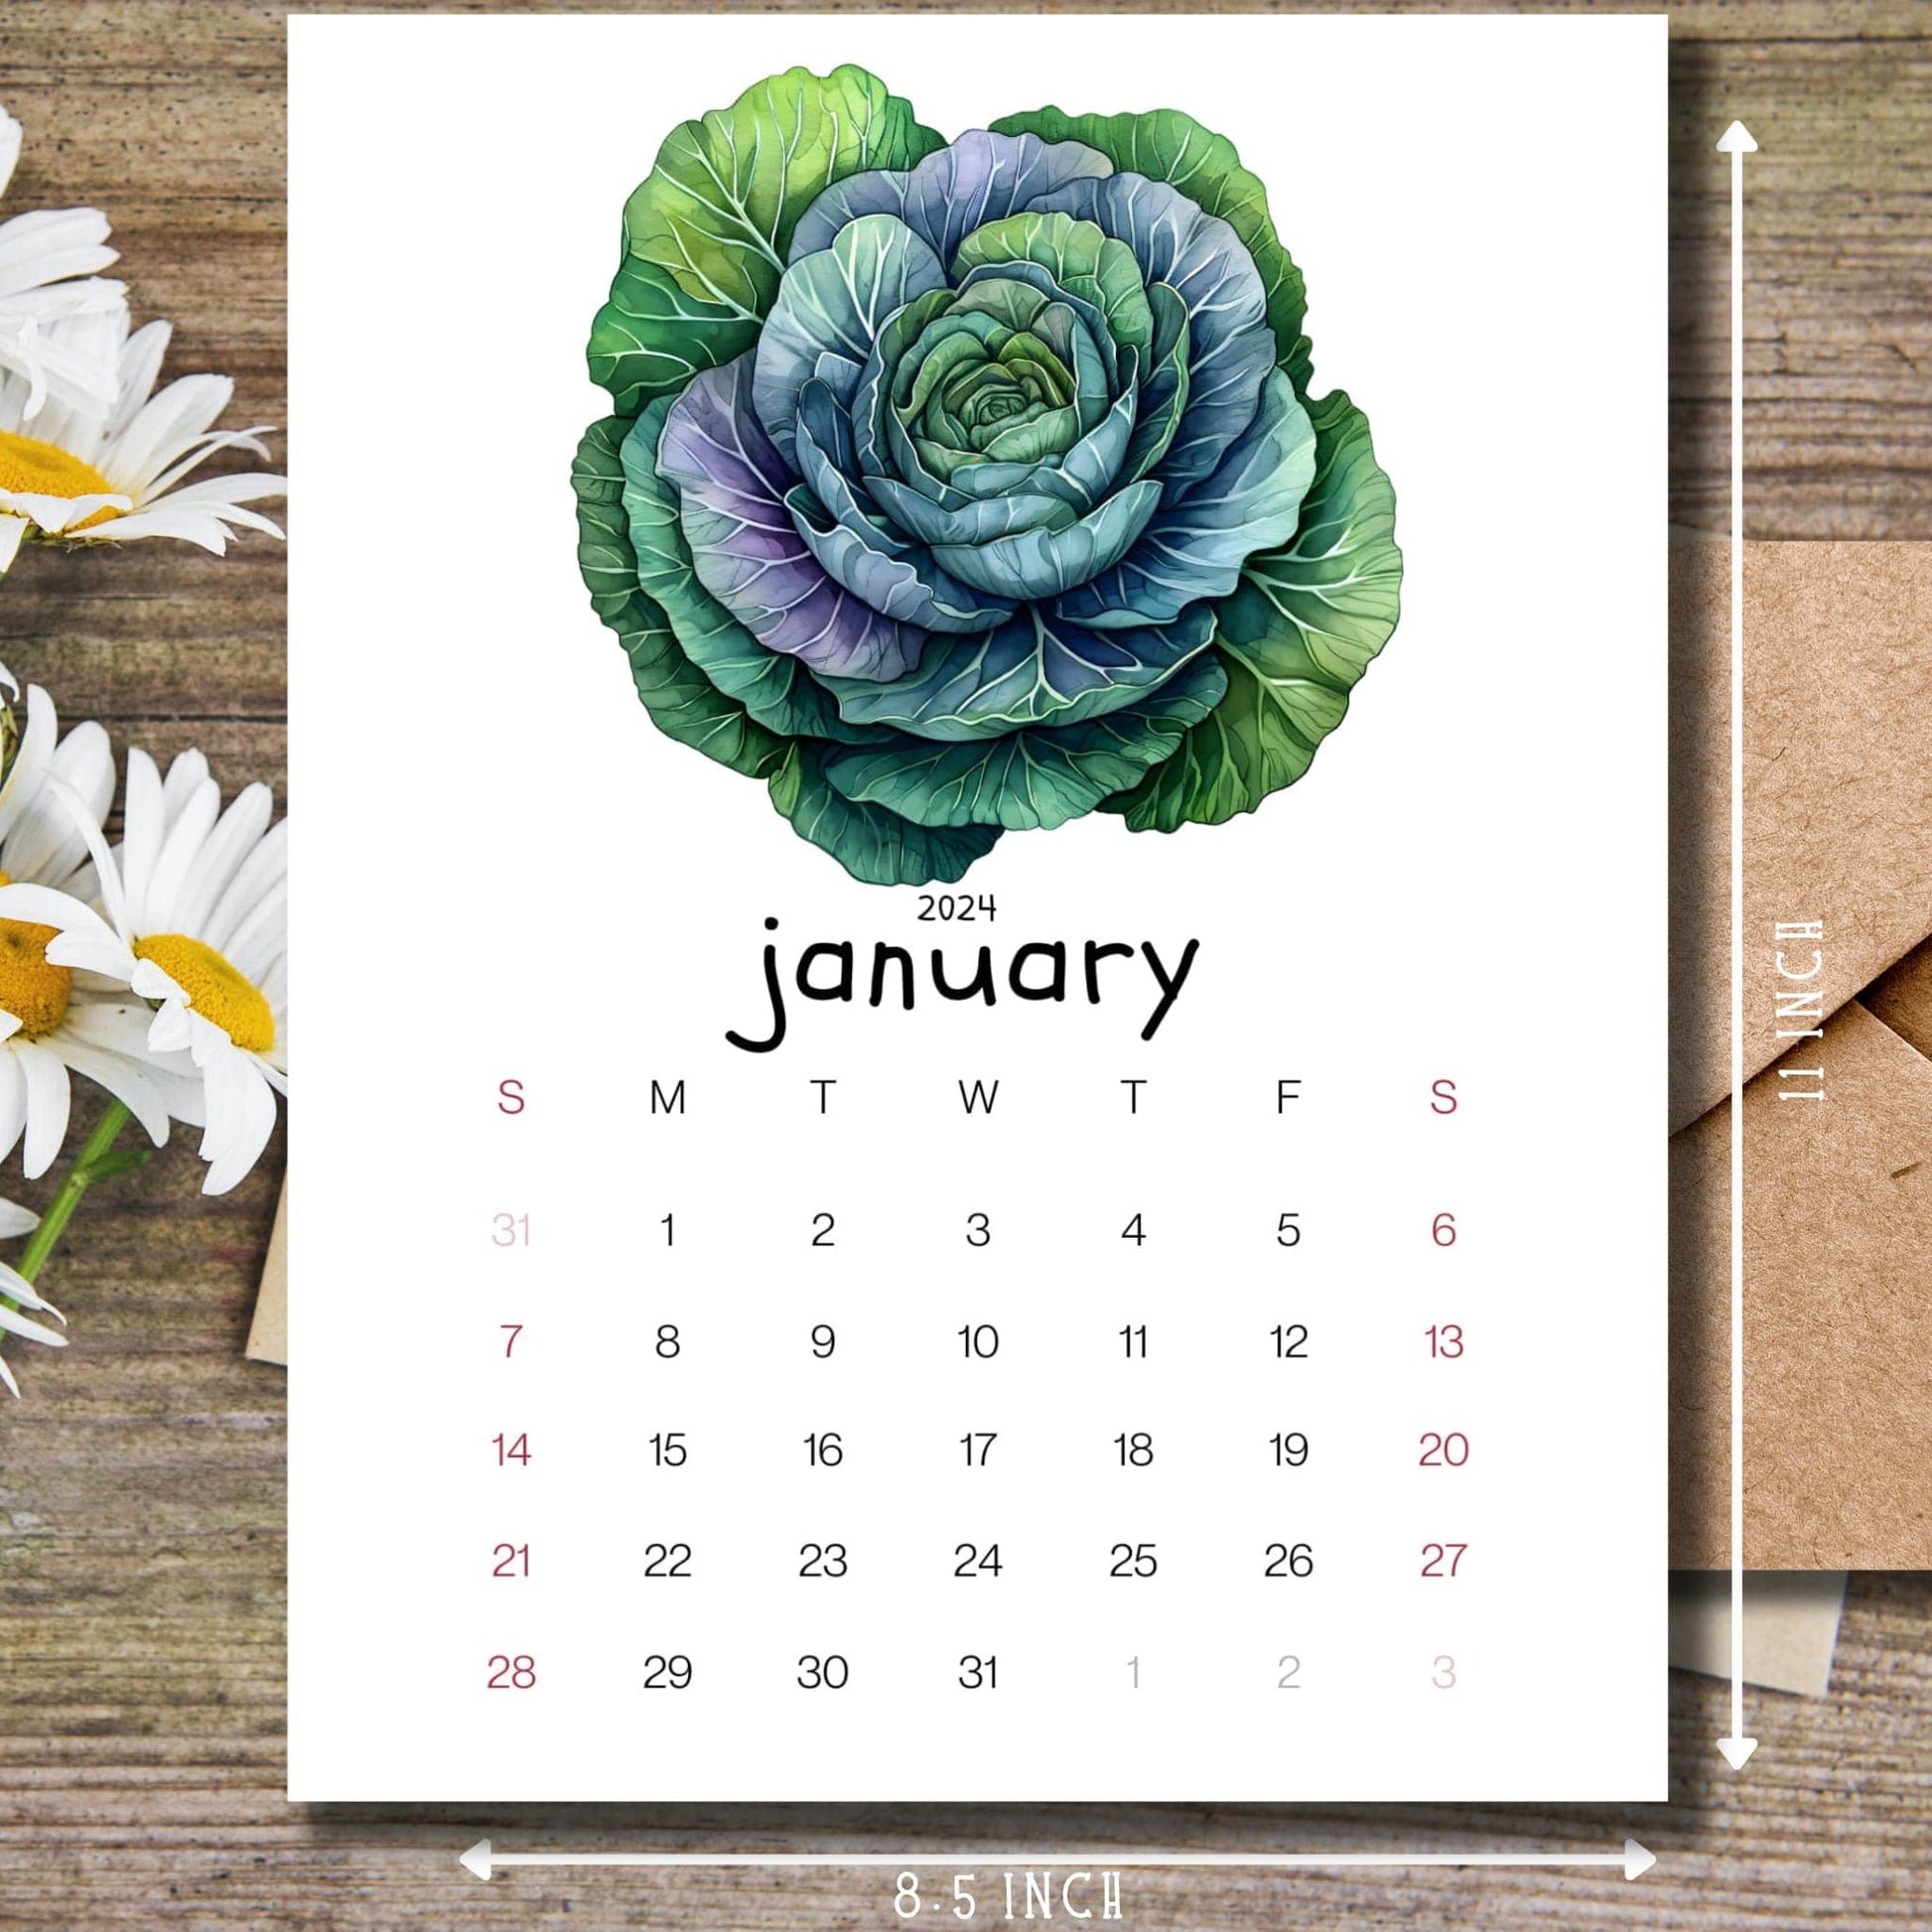 Ornamental cabbages January 2024 calendar on a wooden desk with white flowers and a size guide on the side.